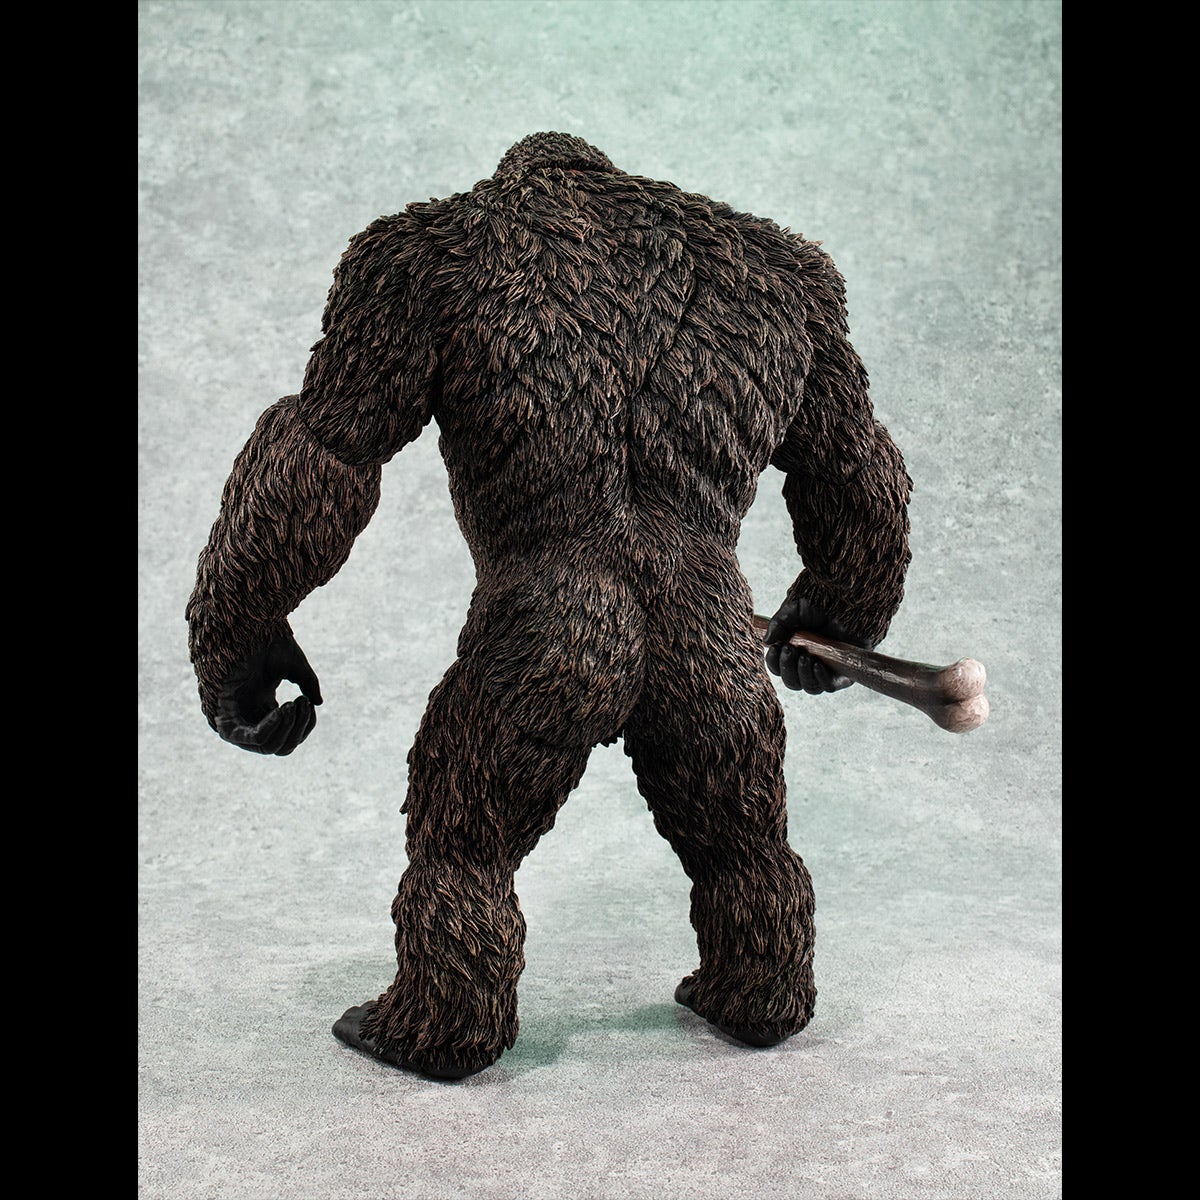 UA Monsters KONG from GODZILLAvs.KONG (2021)-MegaHouse-Ace Cards &amp; Collectibles